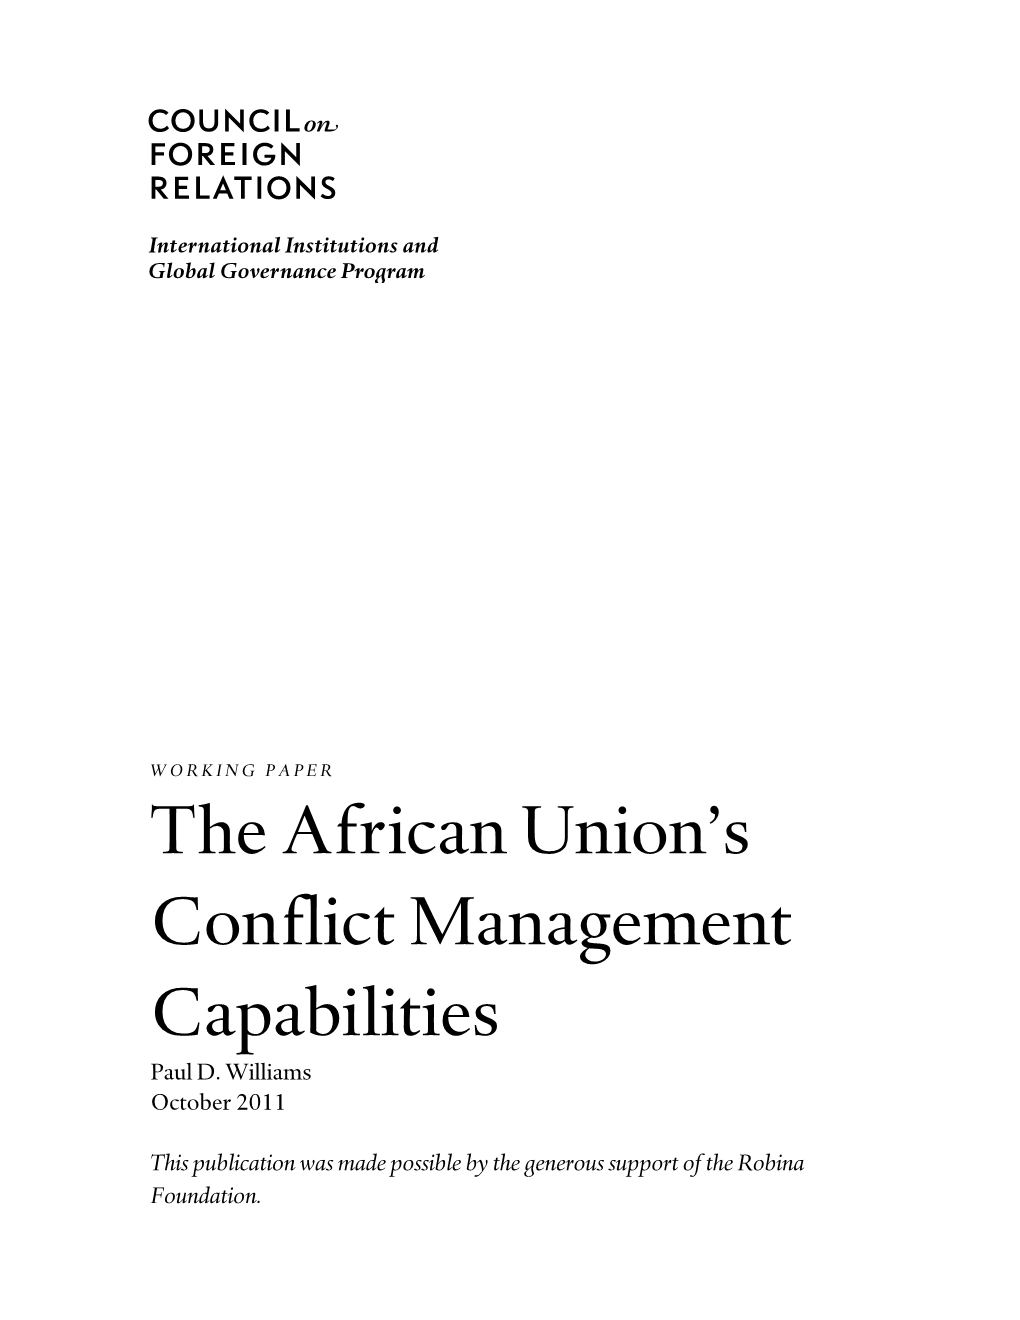 The African Union's Conflict Management Capabilities